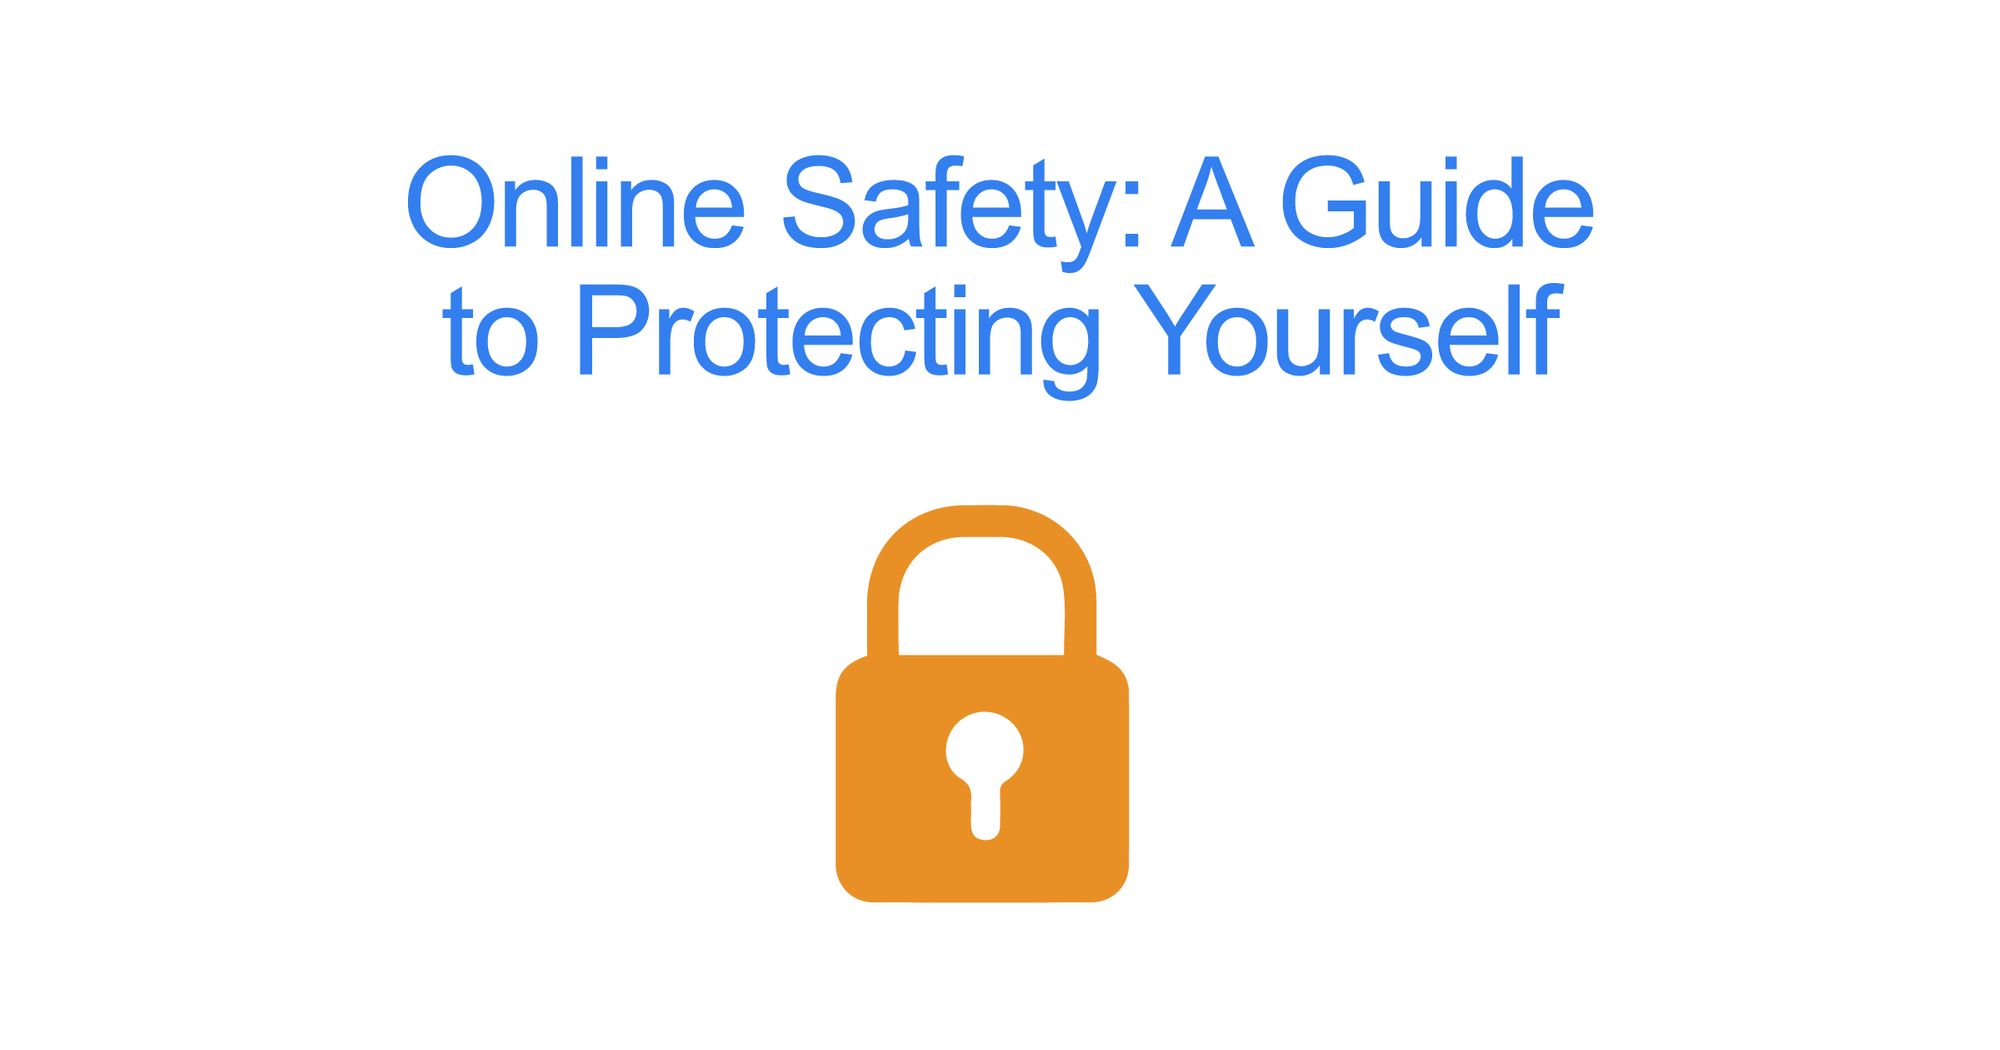 Online Safety – A Guide to Protecting Yourself